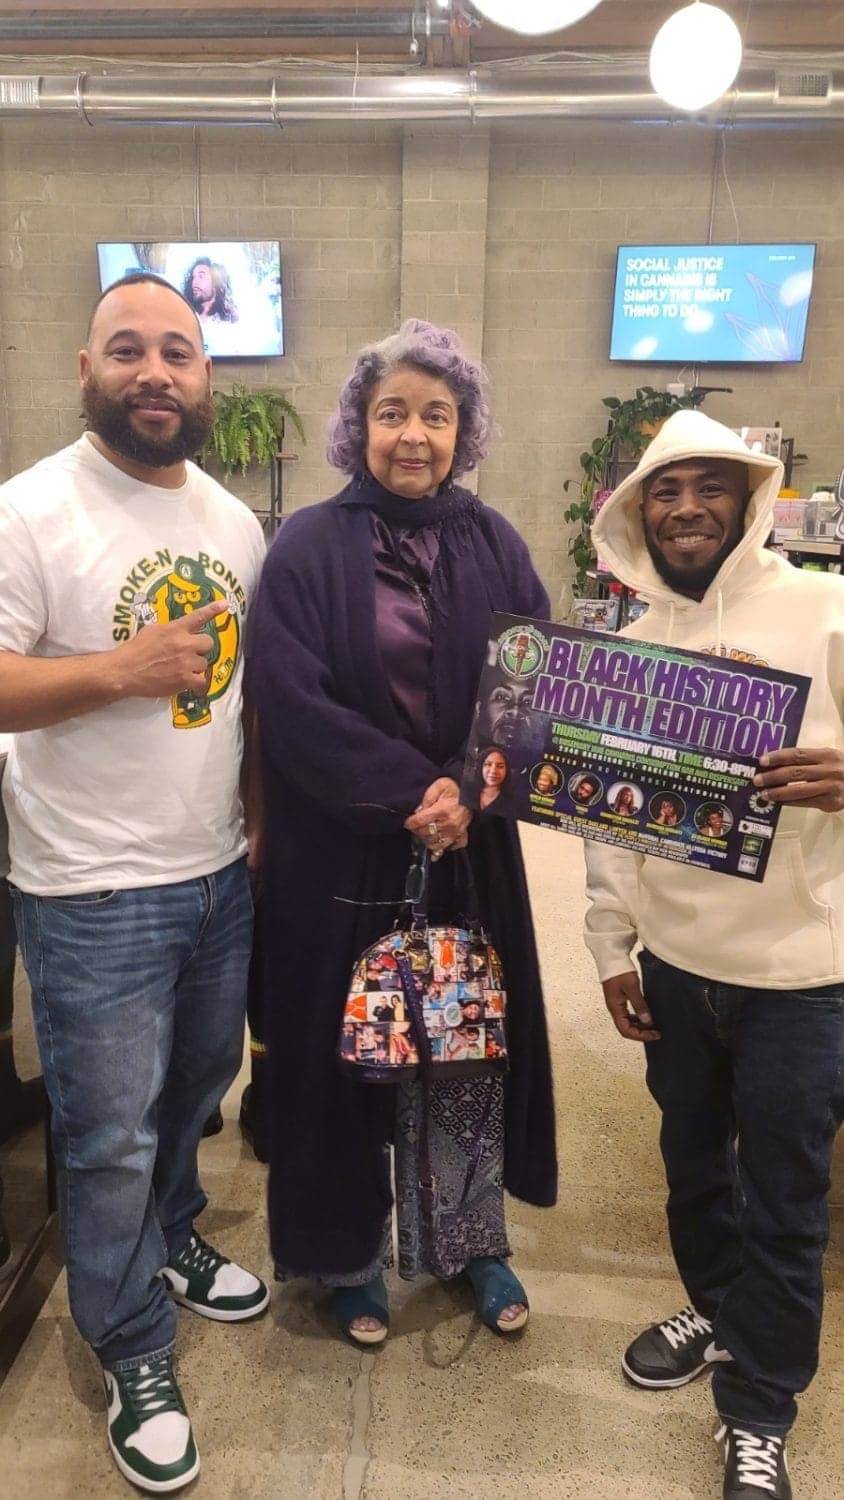 Smoke-N-Word-crew_Rc-the-HostJR-Valrey-and-Cynthia-Carey-Grant, <strong>Black co-owner of Rosemary Jane Consumption Bar talks about local marijuana business and cannabis politics</strong>, Local News & Views News & Views 